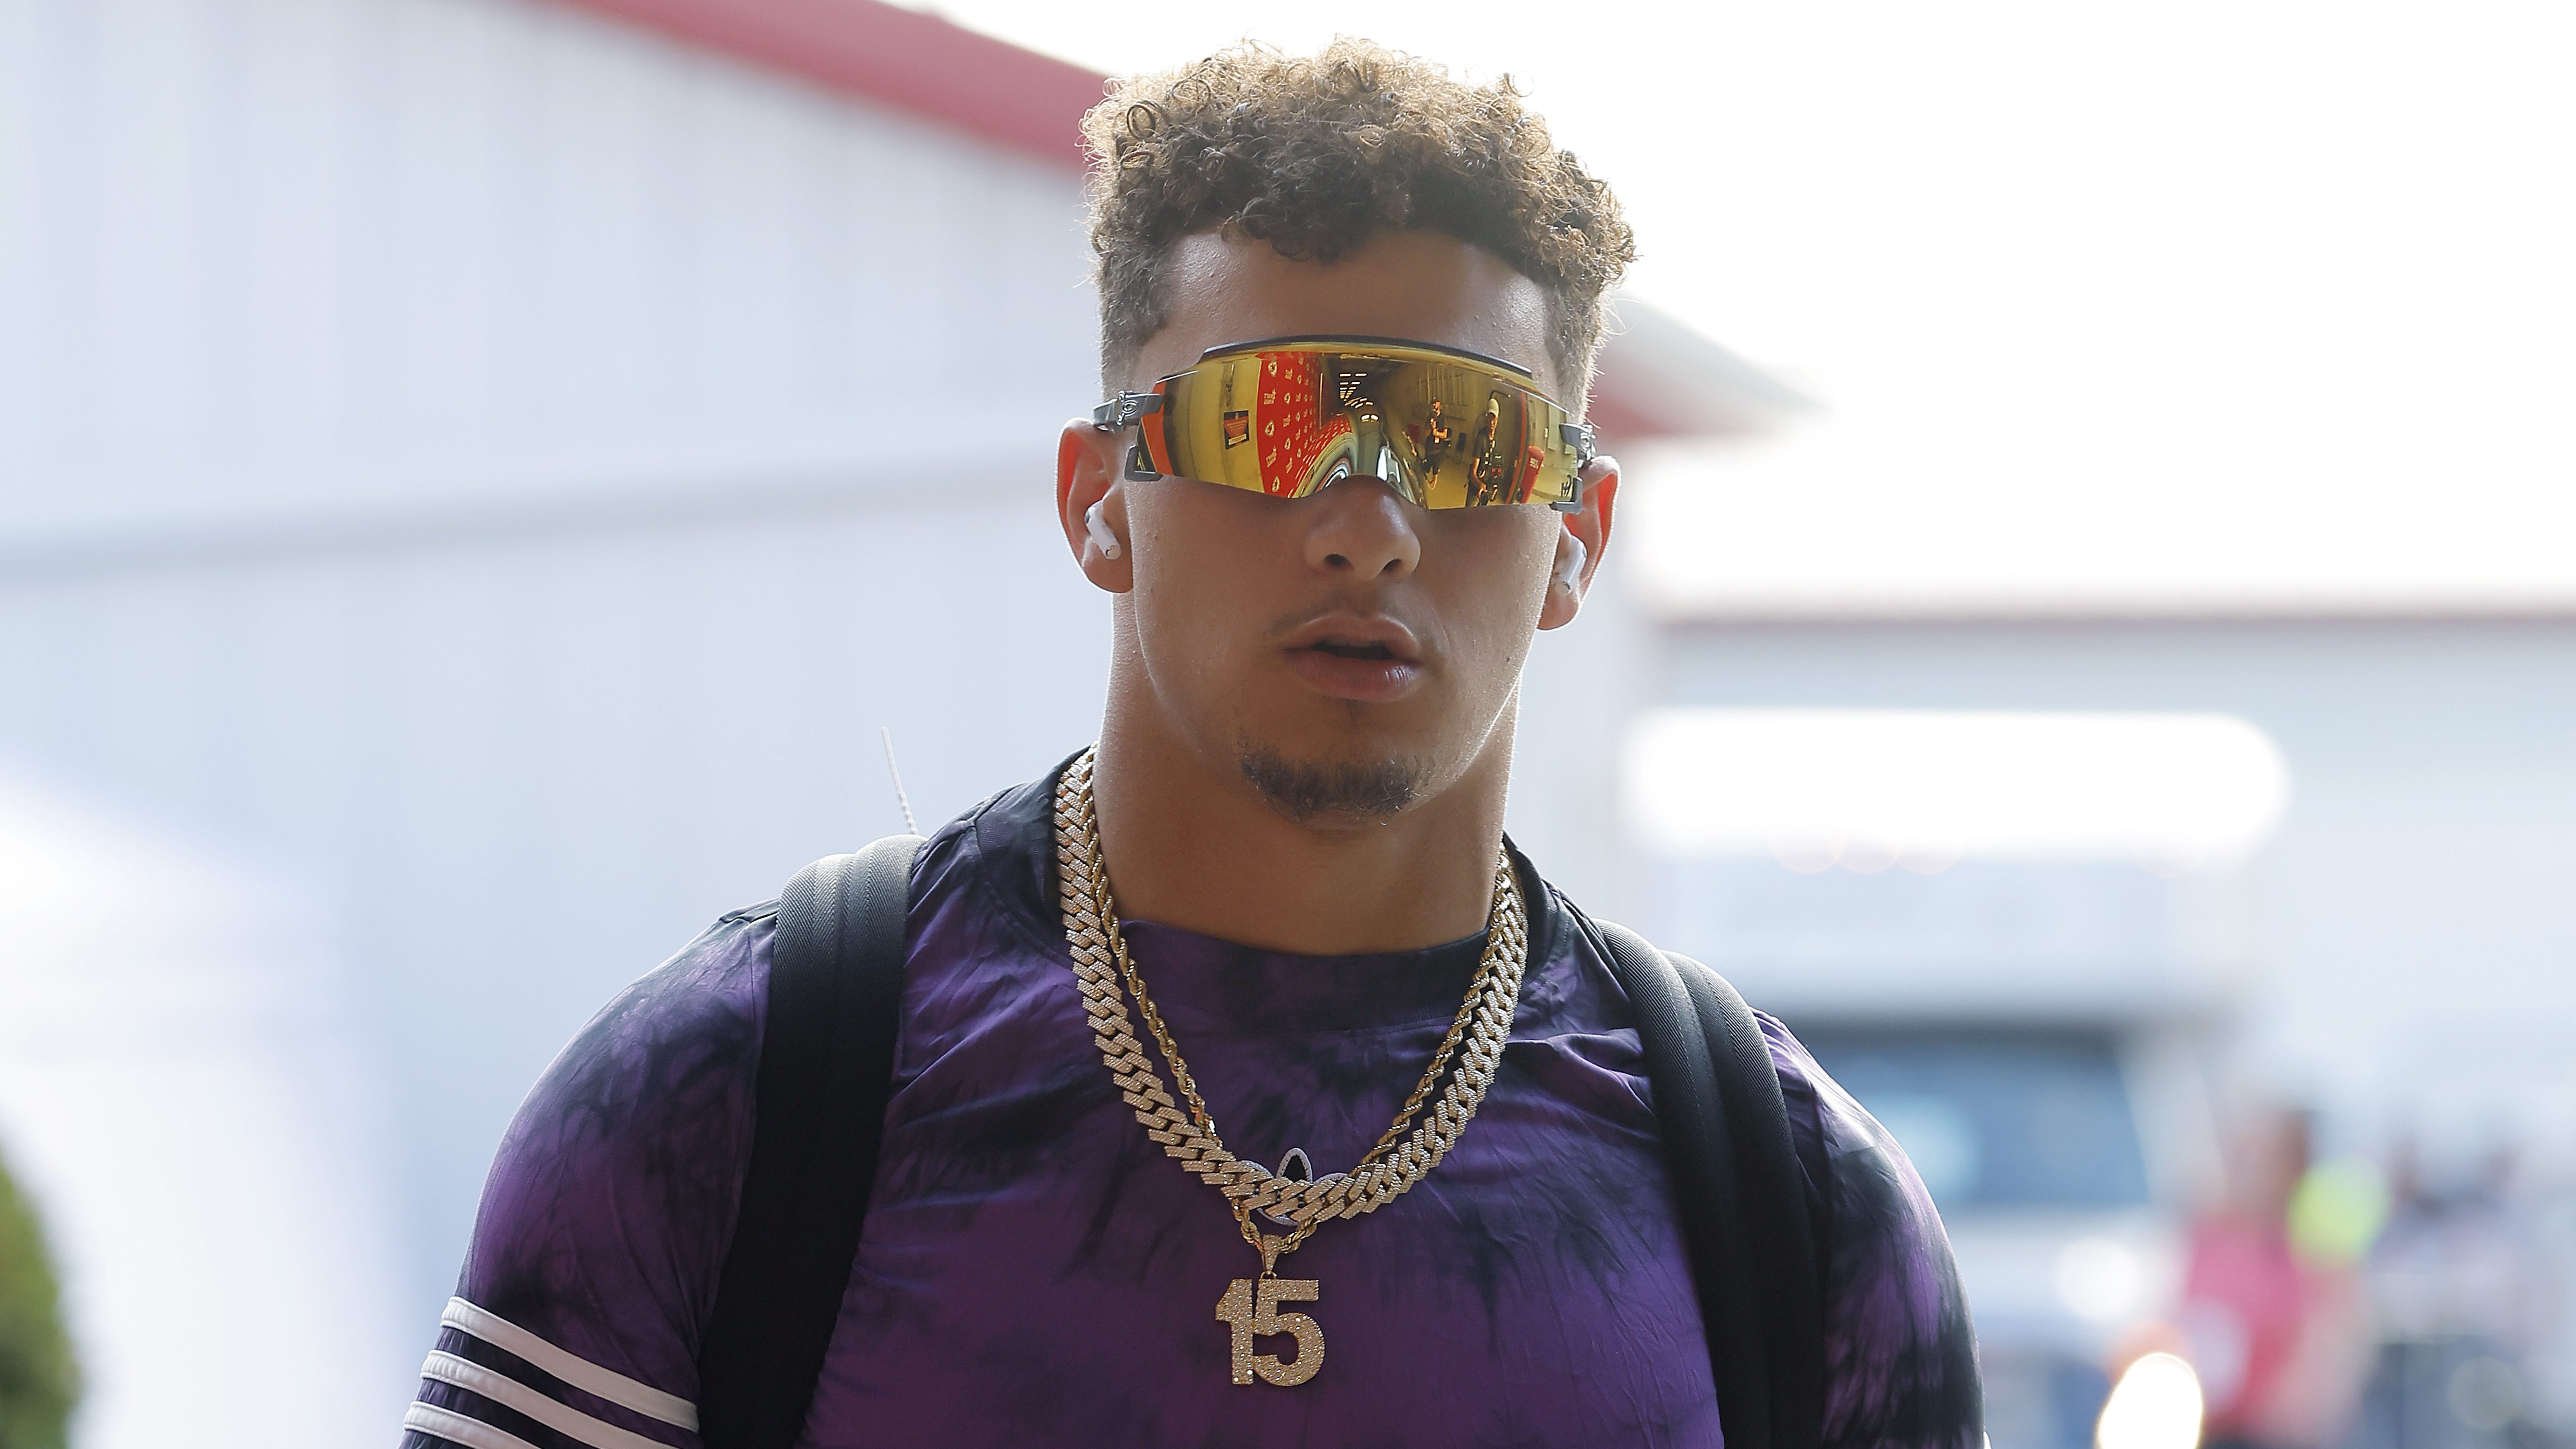 Patrick Mahomes stars in new commercial for Oakley sunglasses